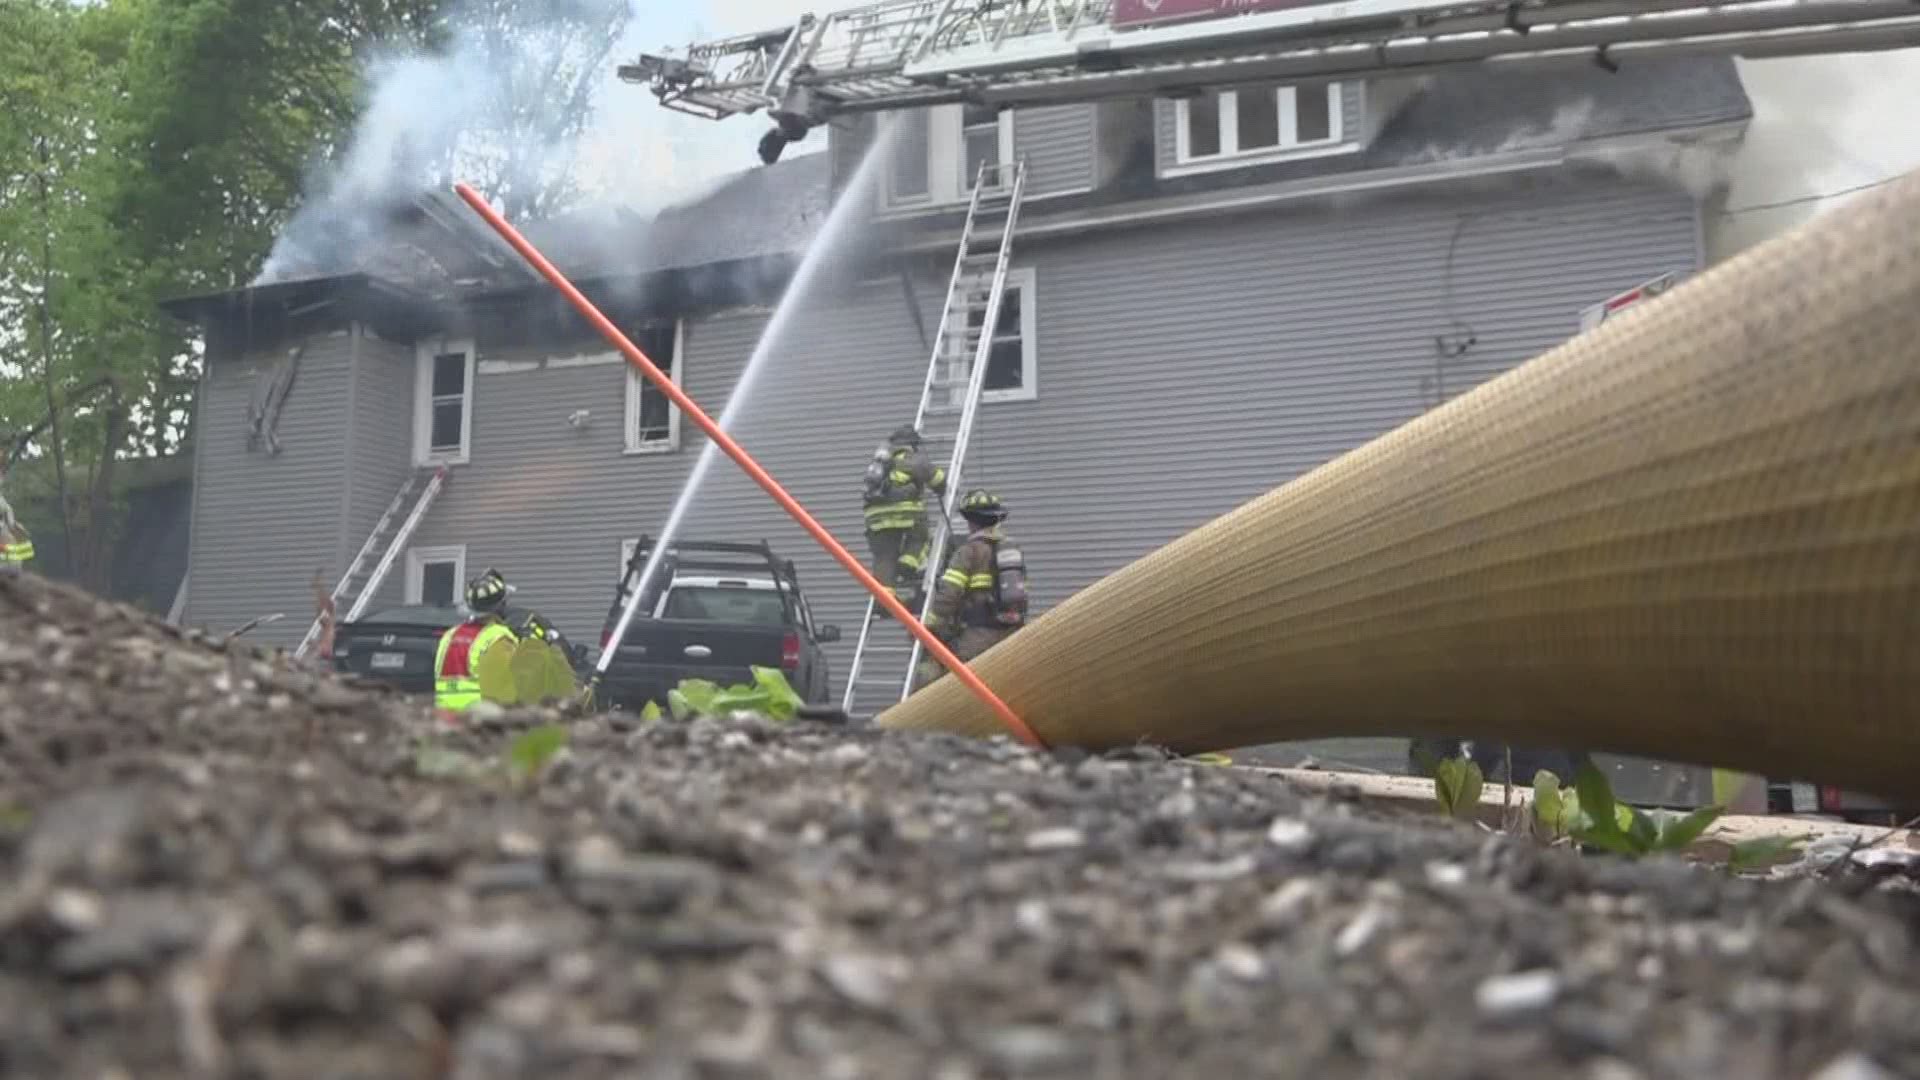 It took firefighters from more than six neighboring towns to contain the fire.